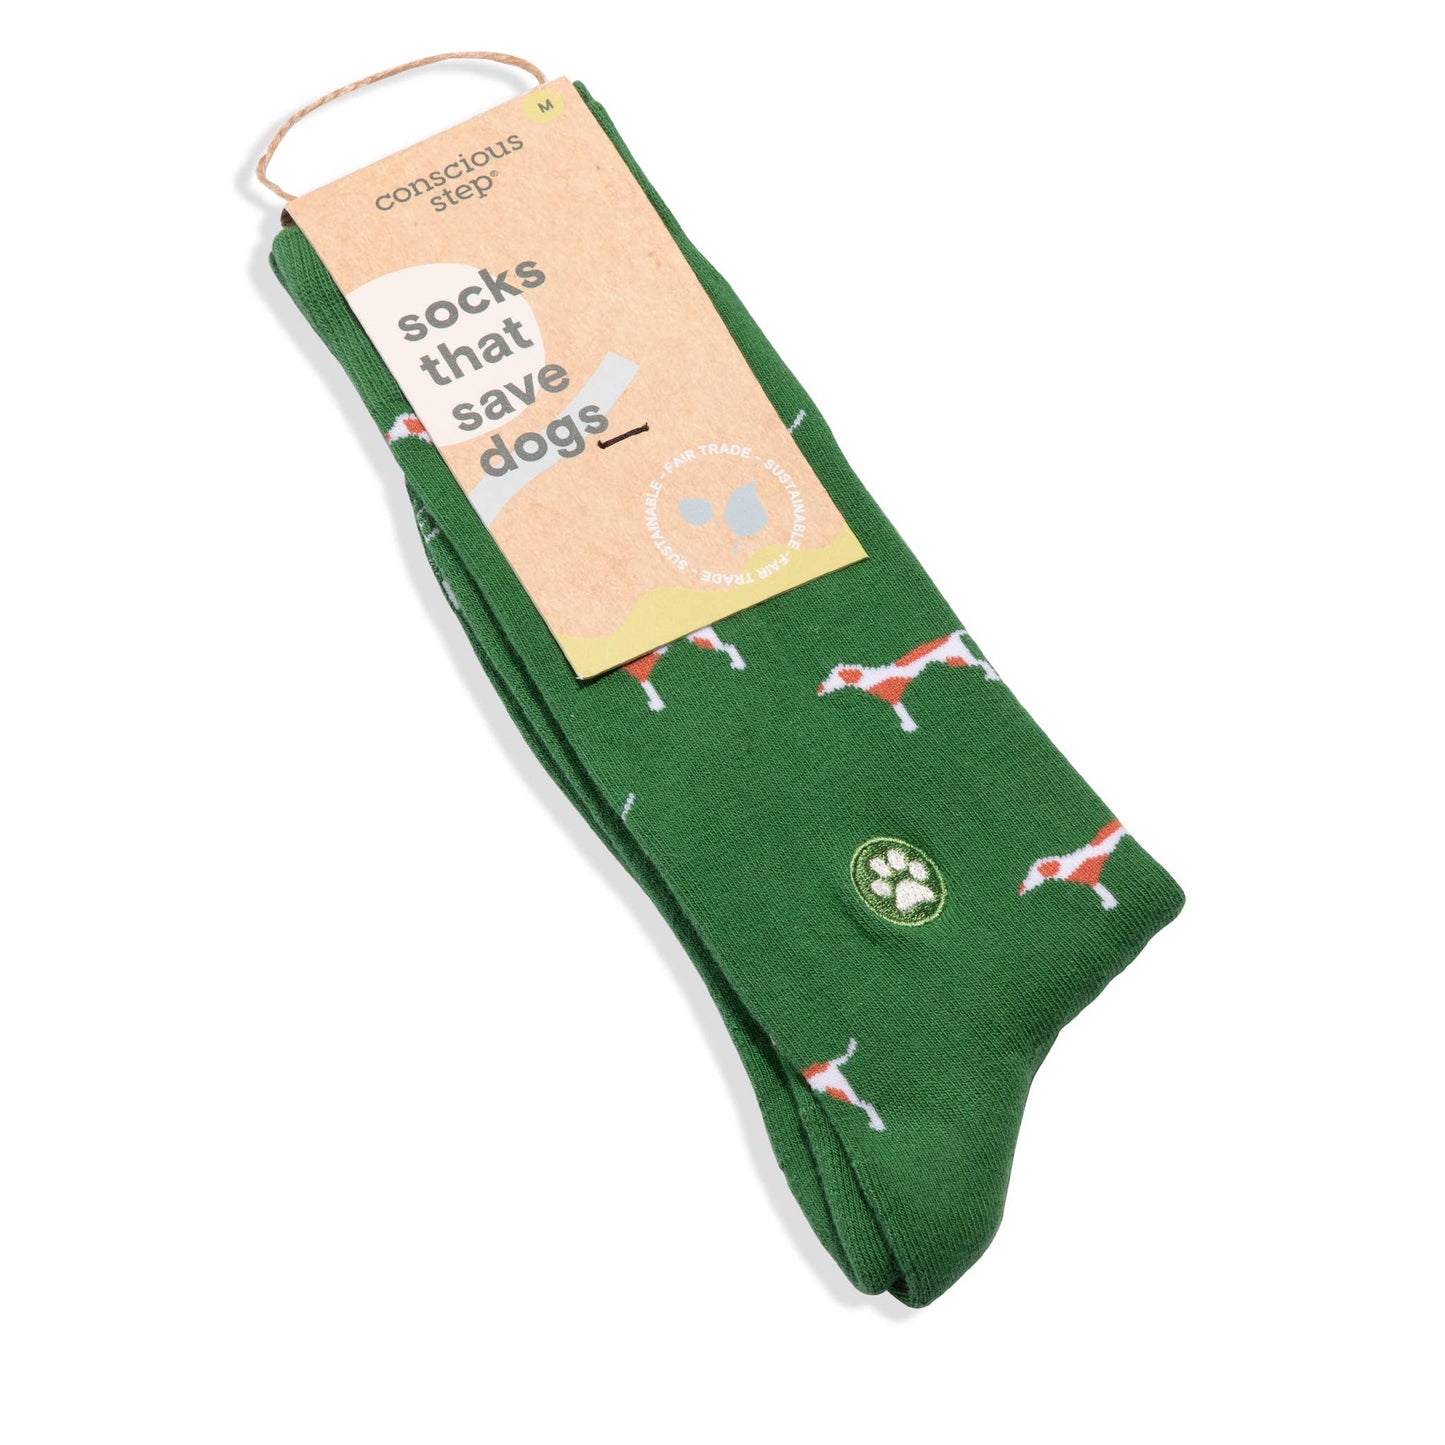 Socks that Save Dogs (Green Dogs): Small